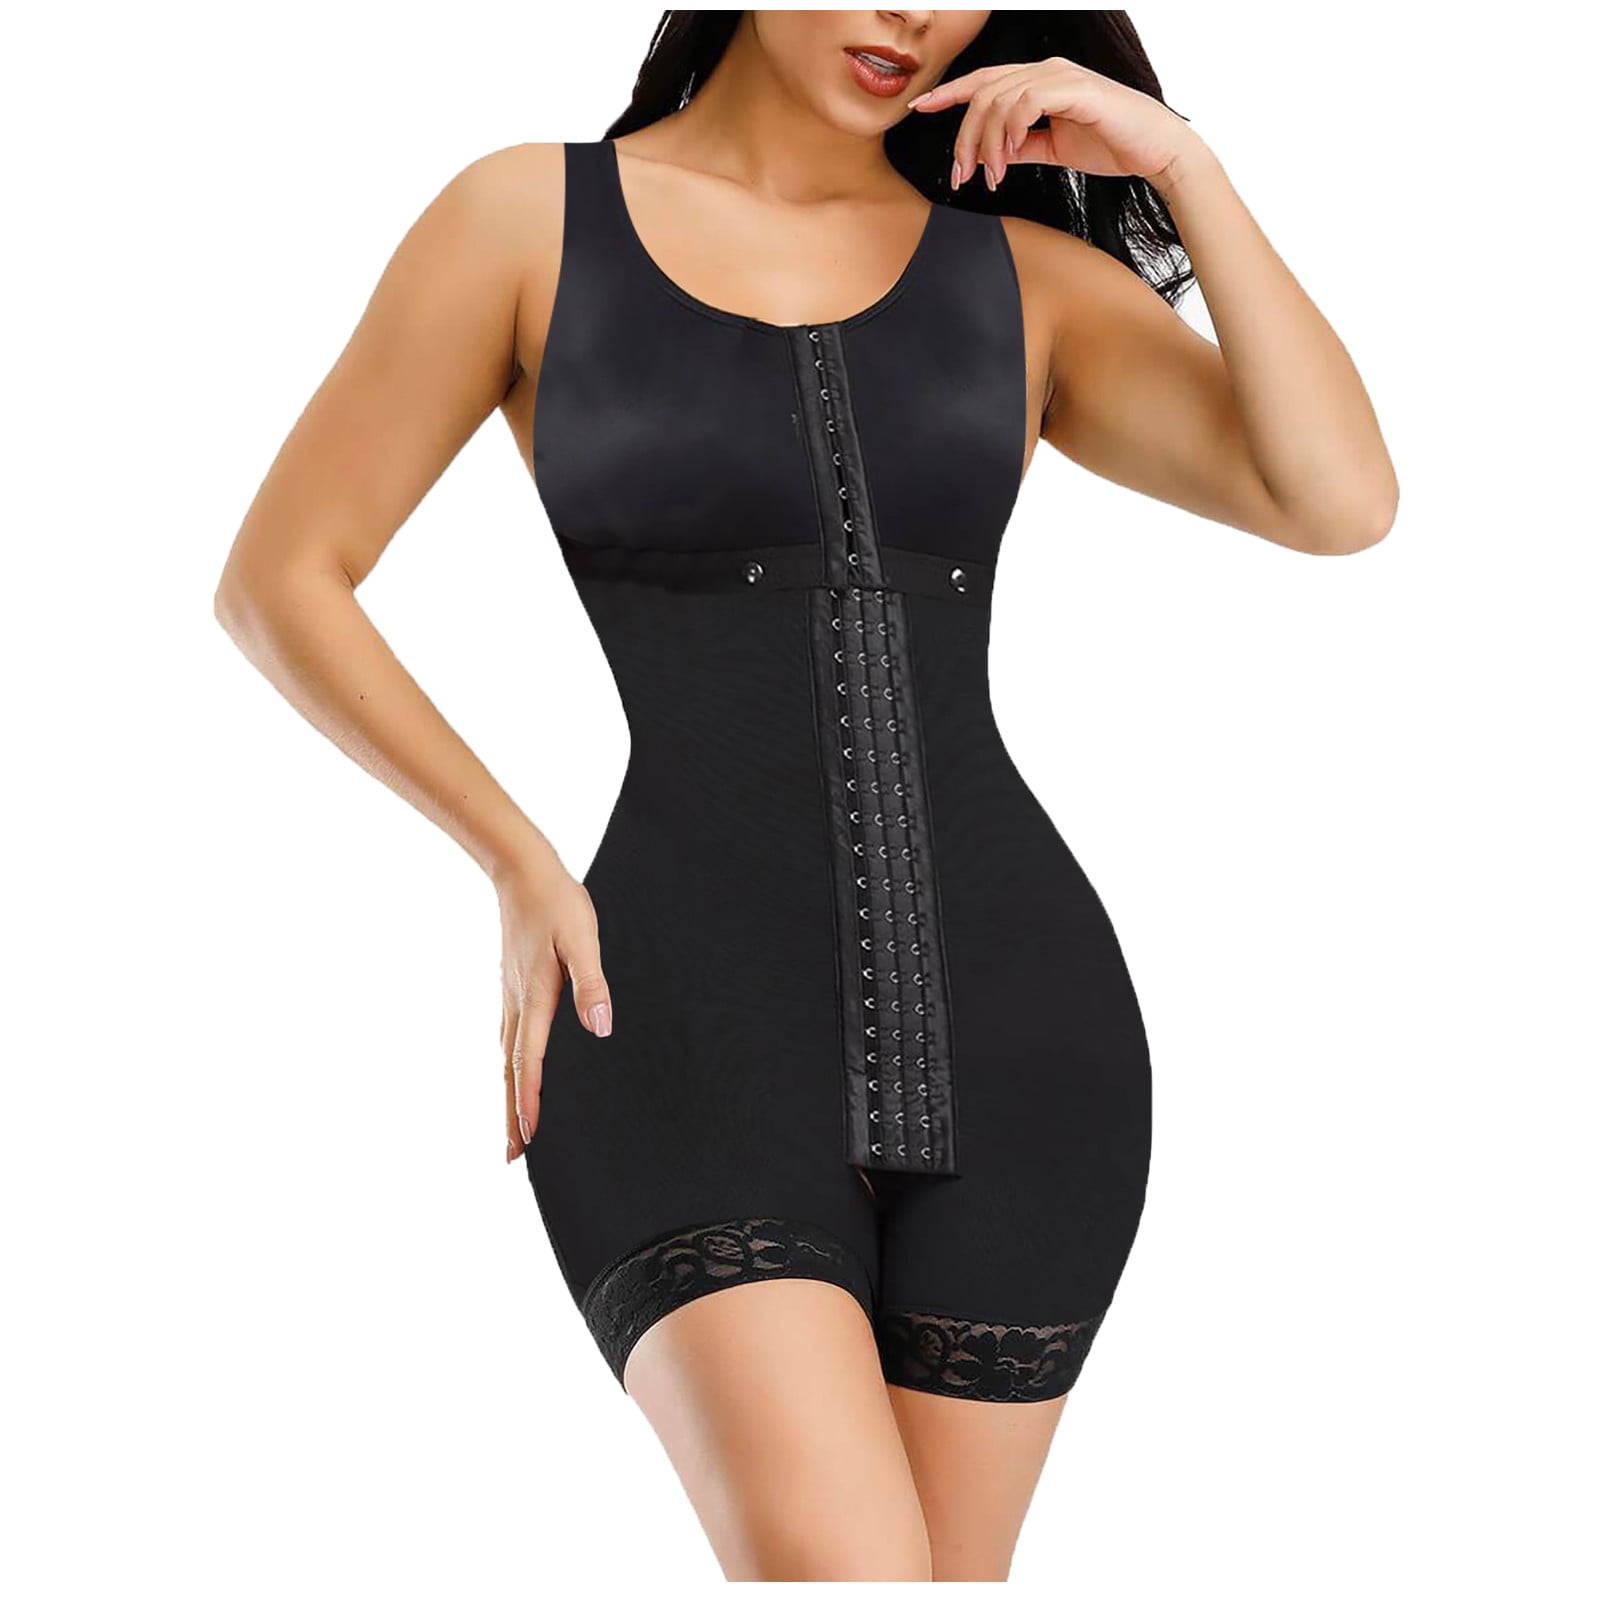 Womens Full Body Suit U-Neck Vest Breasted Surgeries Lace